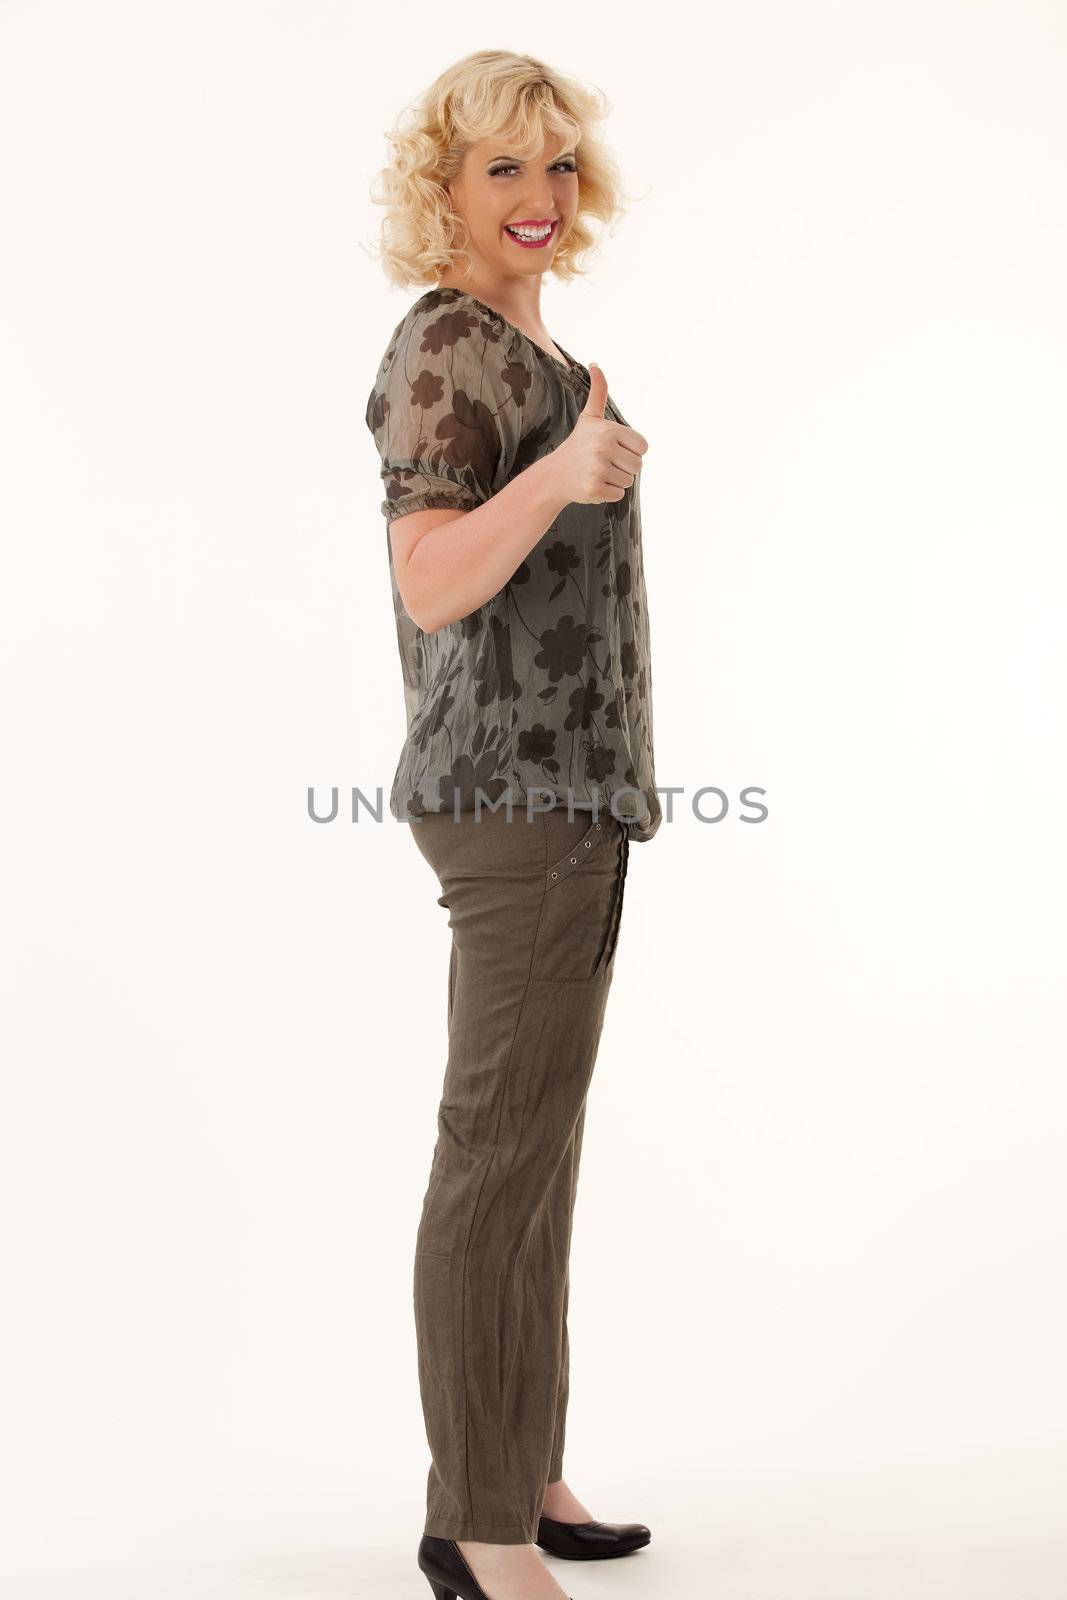 Funny woman with oversized thinks positively by STphotography